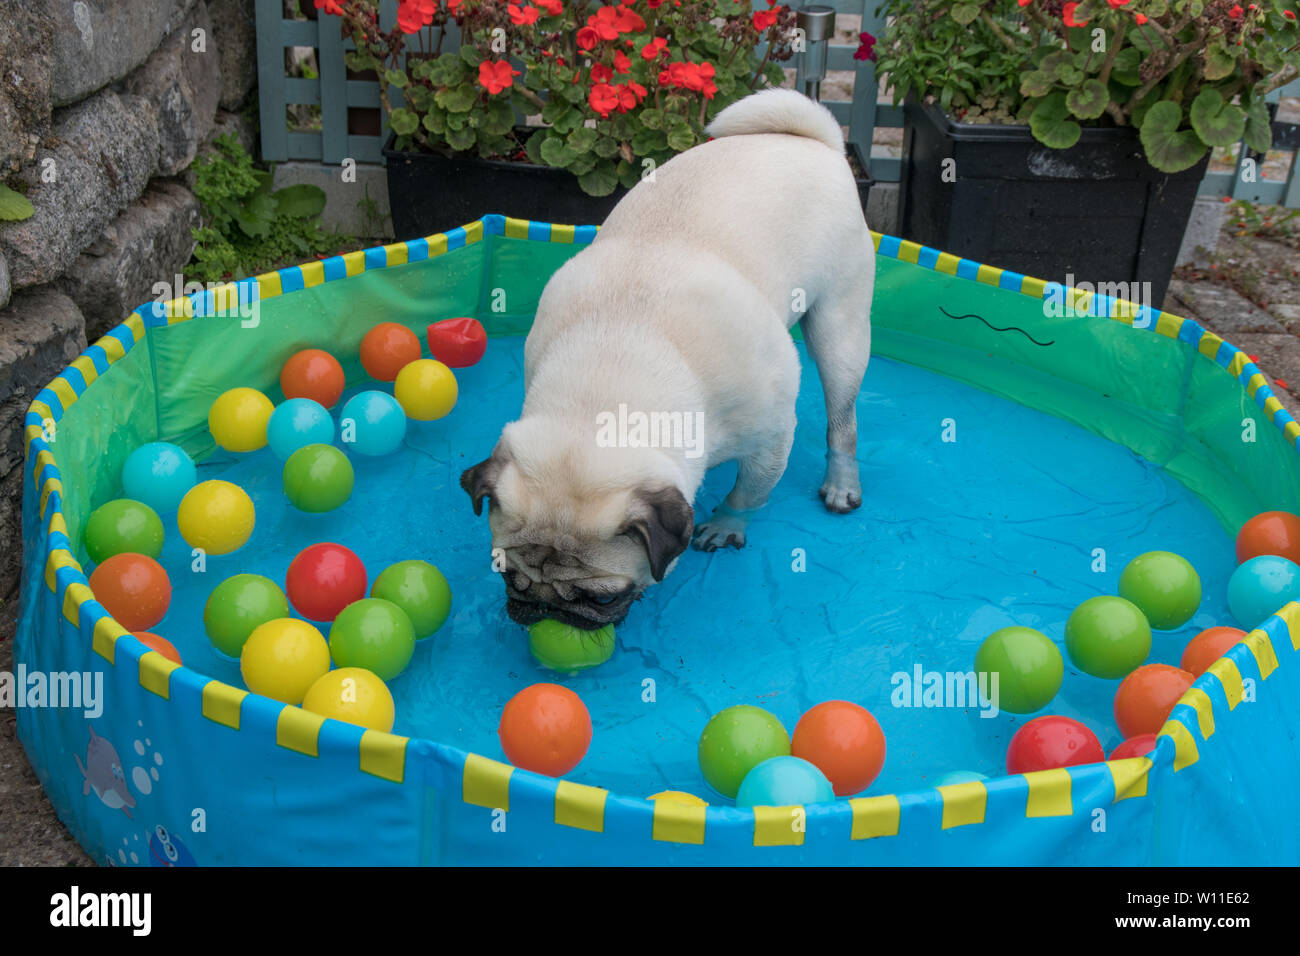 Pug dog standing in a paddling pool with balls in, cooling down in hot weather Stock Photo